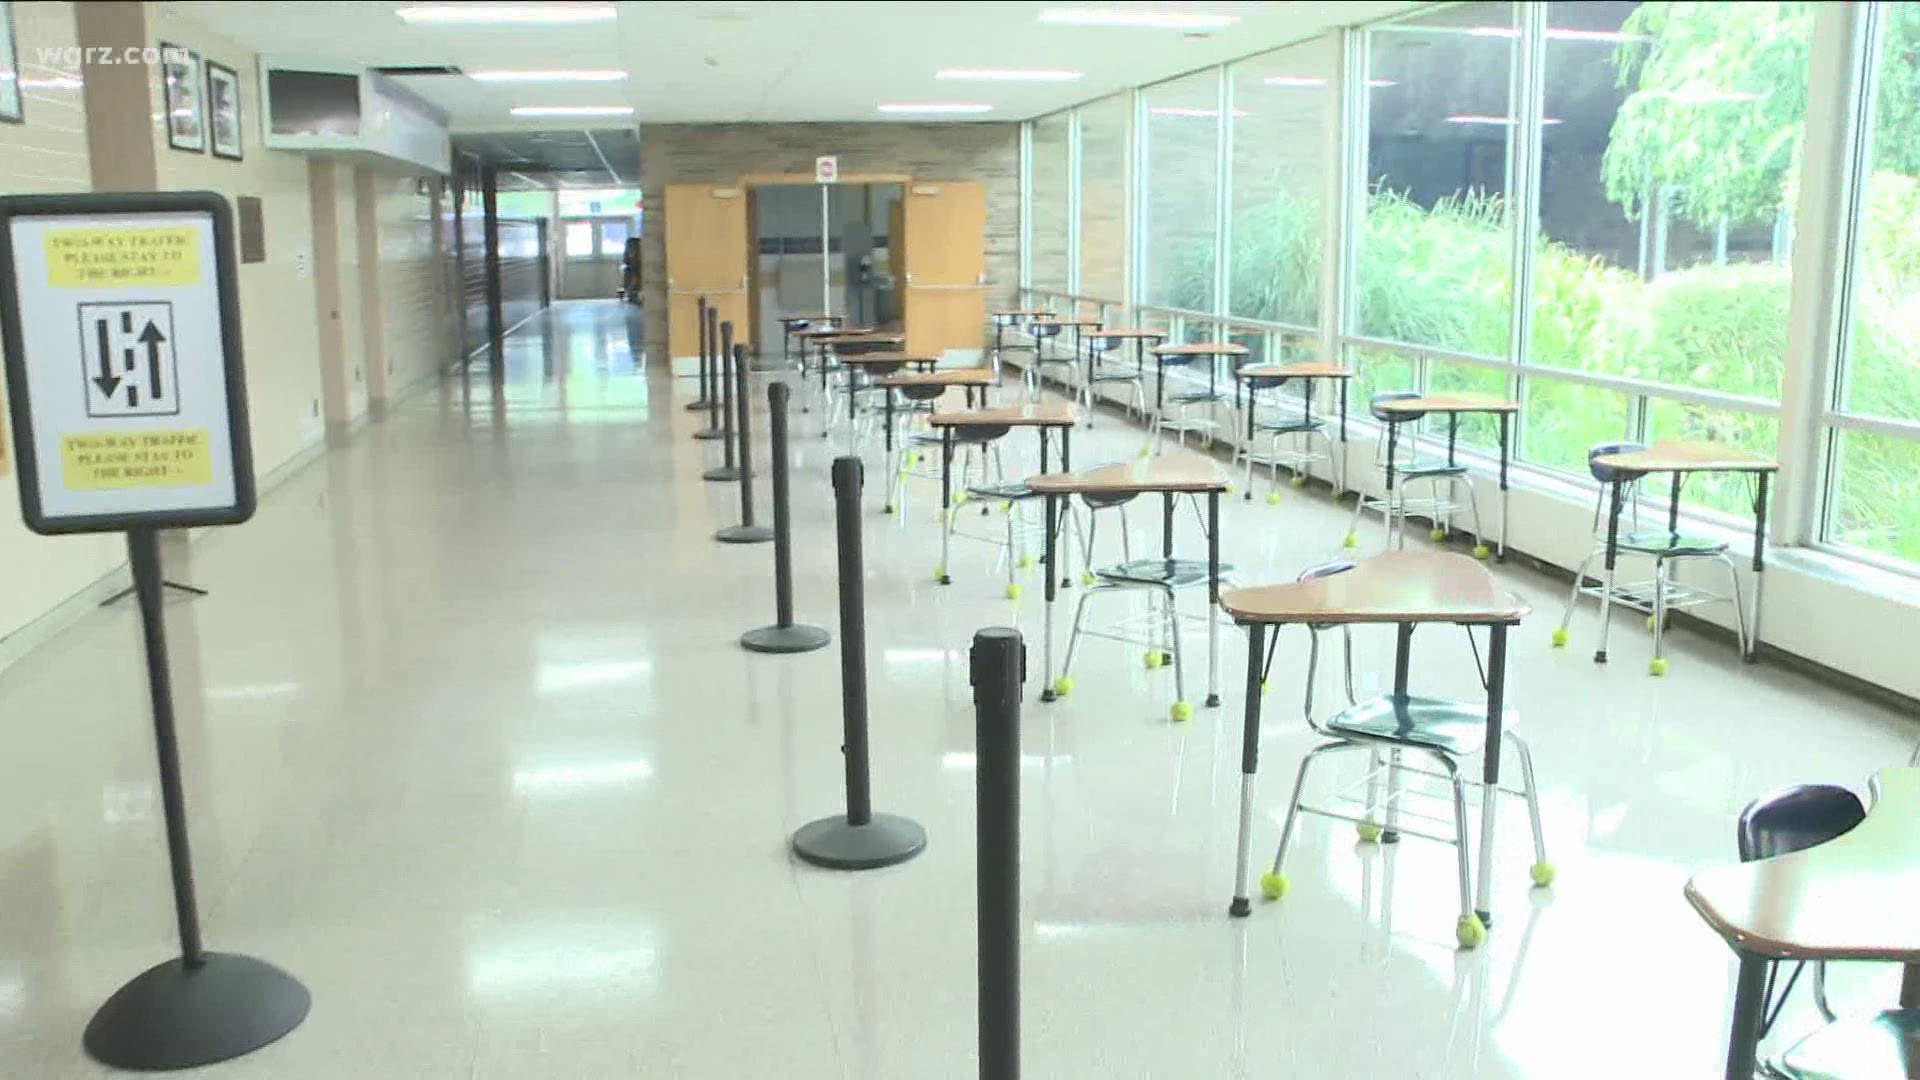 Classes start tomorrow in some districts, including Alden Central Schools. Today we got a look inside to see just how many things will be different.